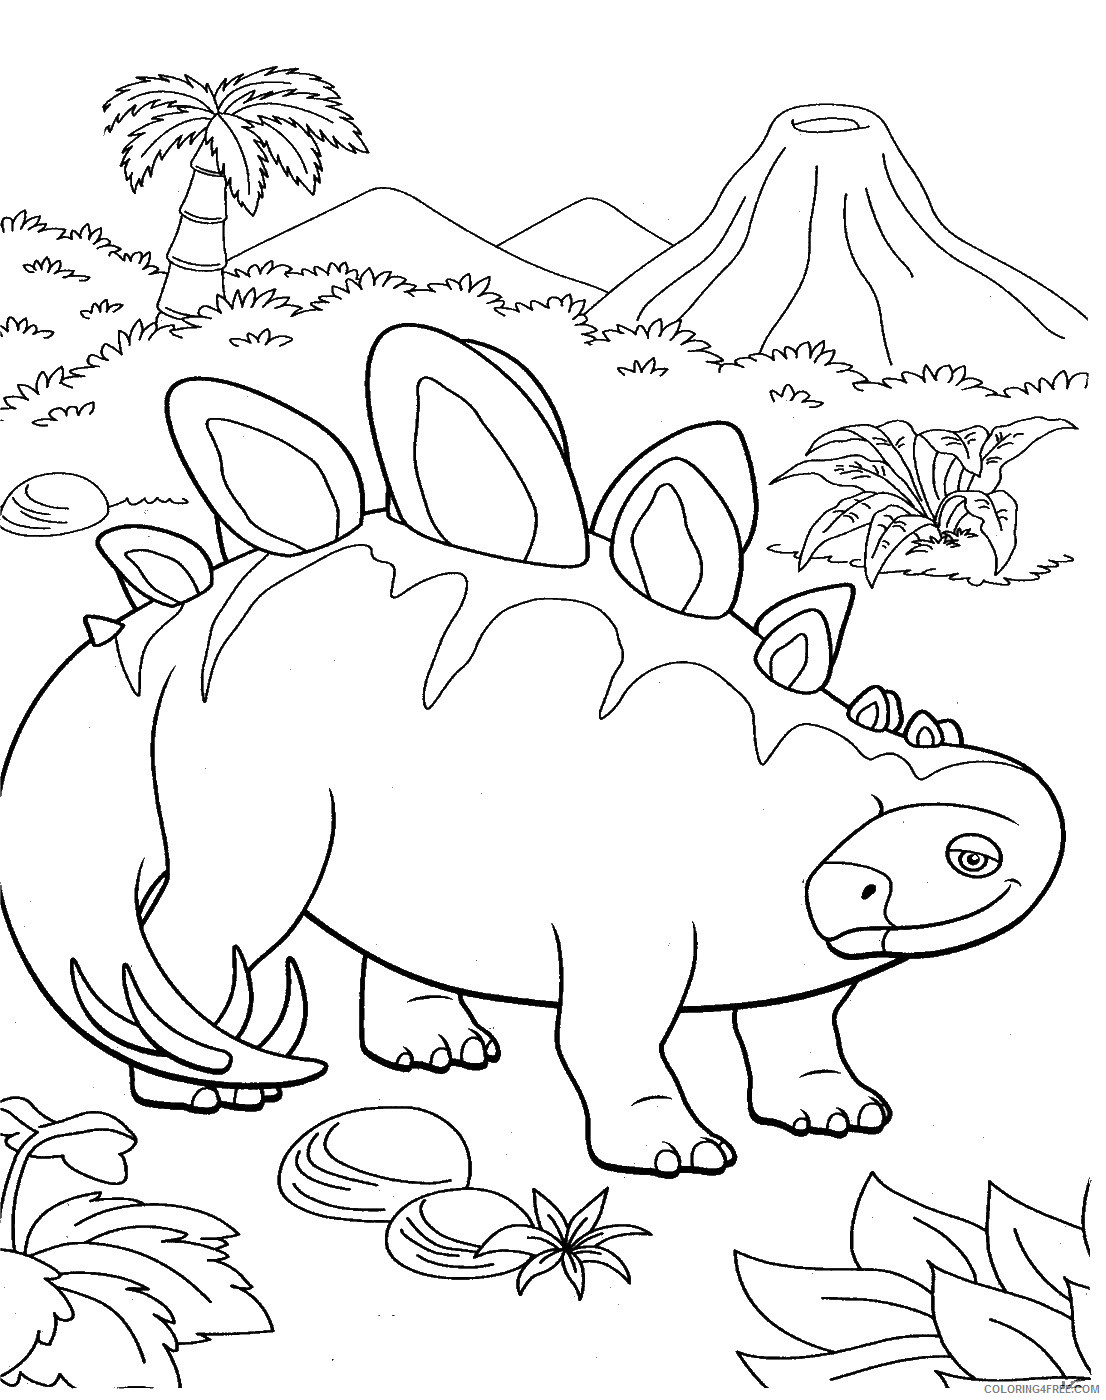 Dinosaur Train Coloring Pages Cartoons dino_train_cl_08 Printable 2020 2229 Coloring4free